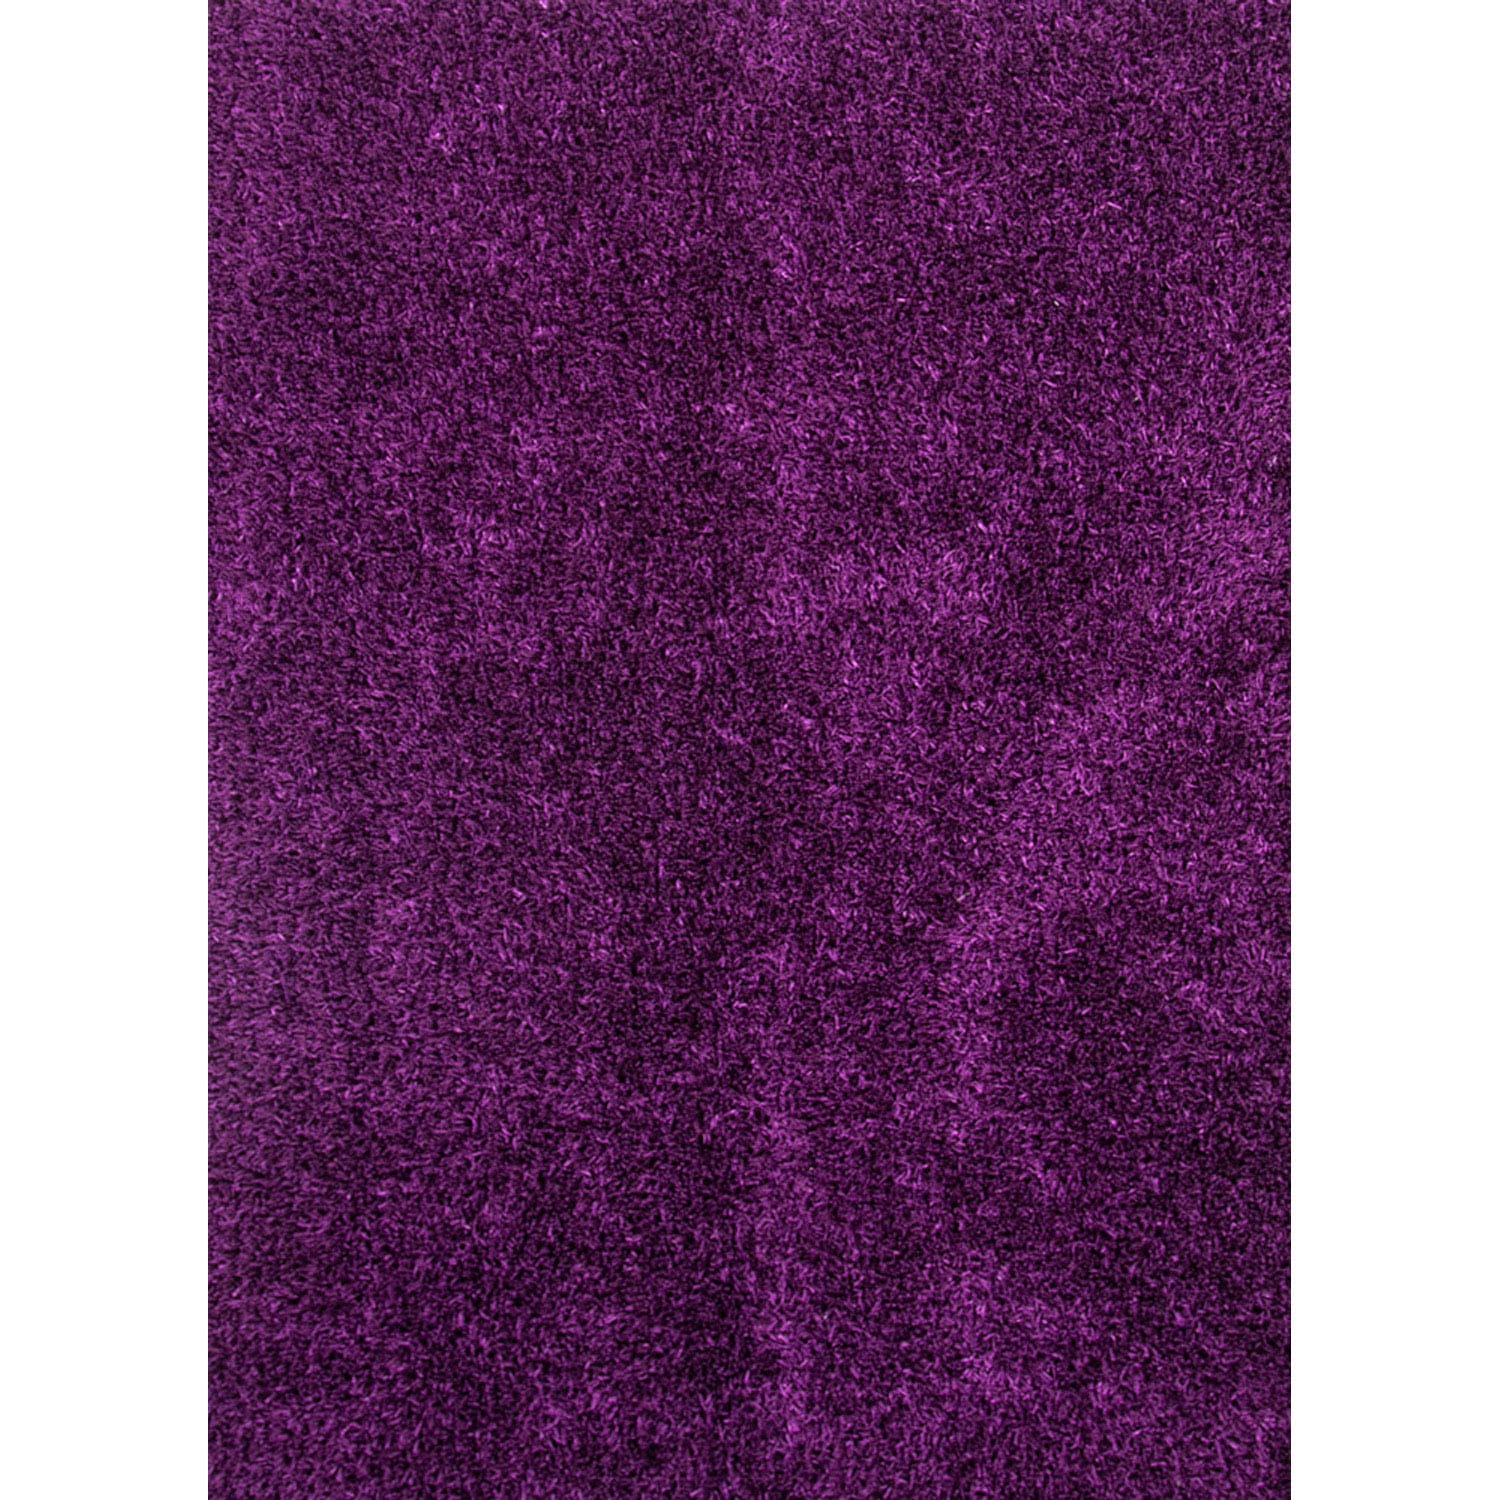 Hand woven Shags Solid Pattern Purple Rug (76 X 96)